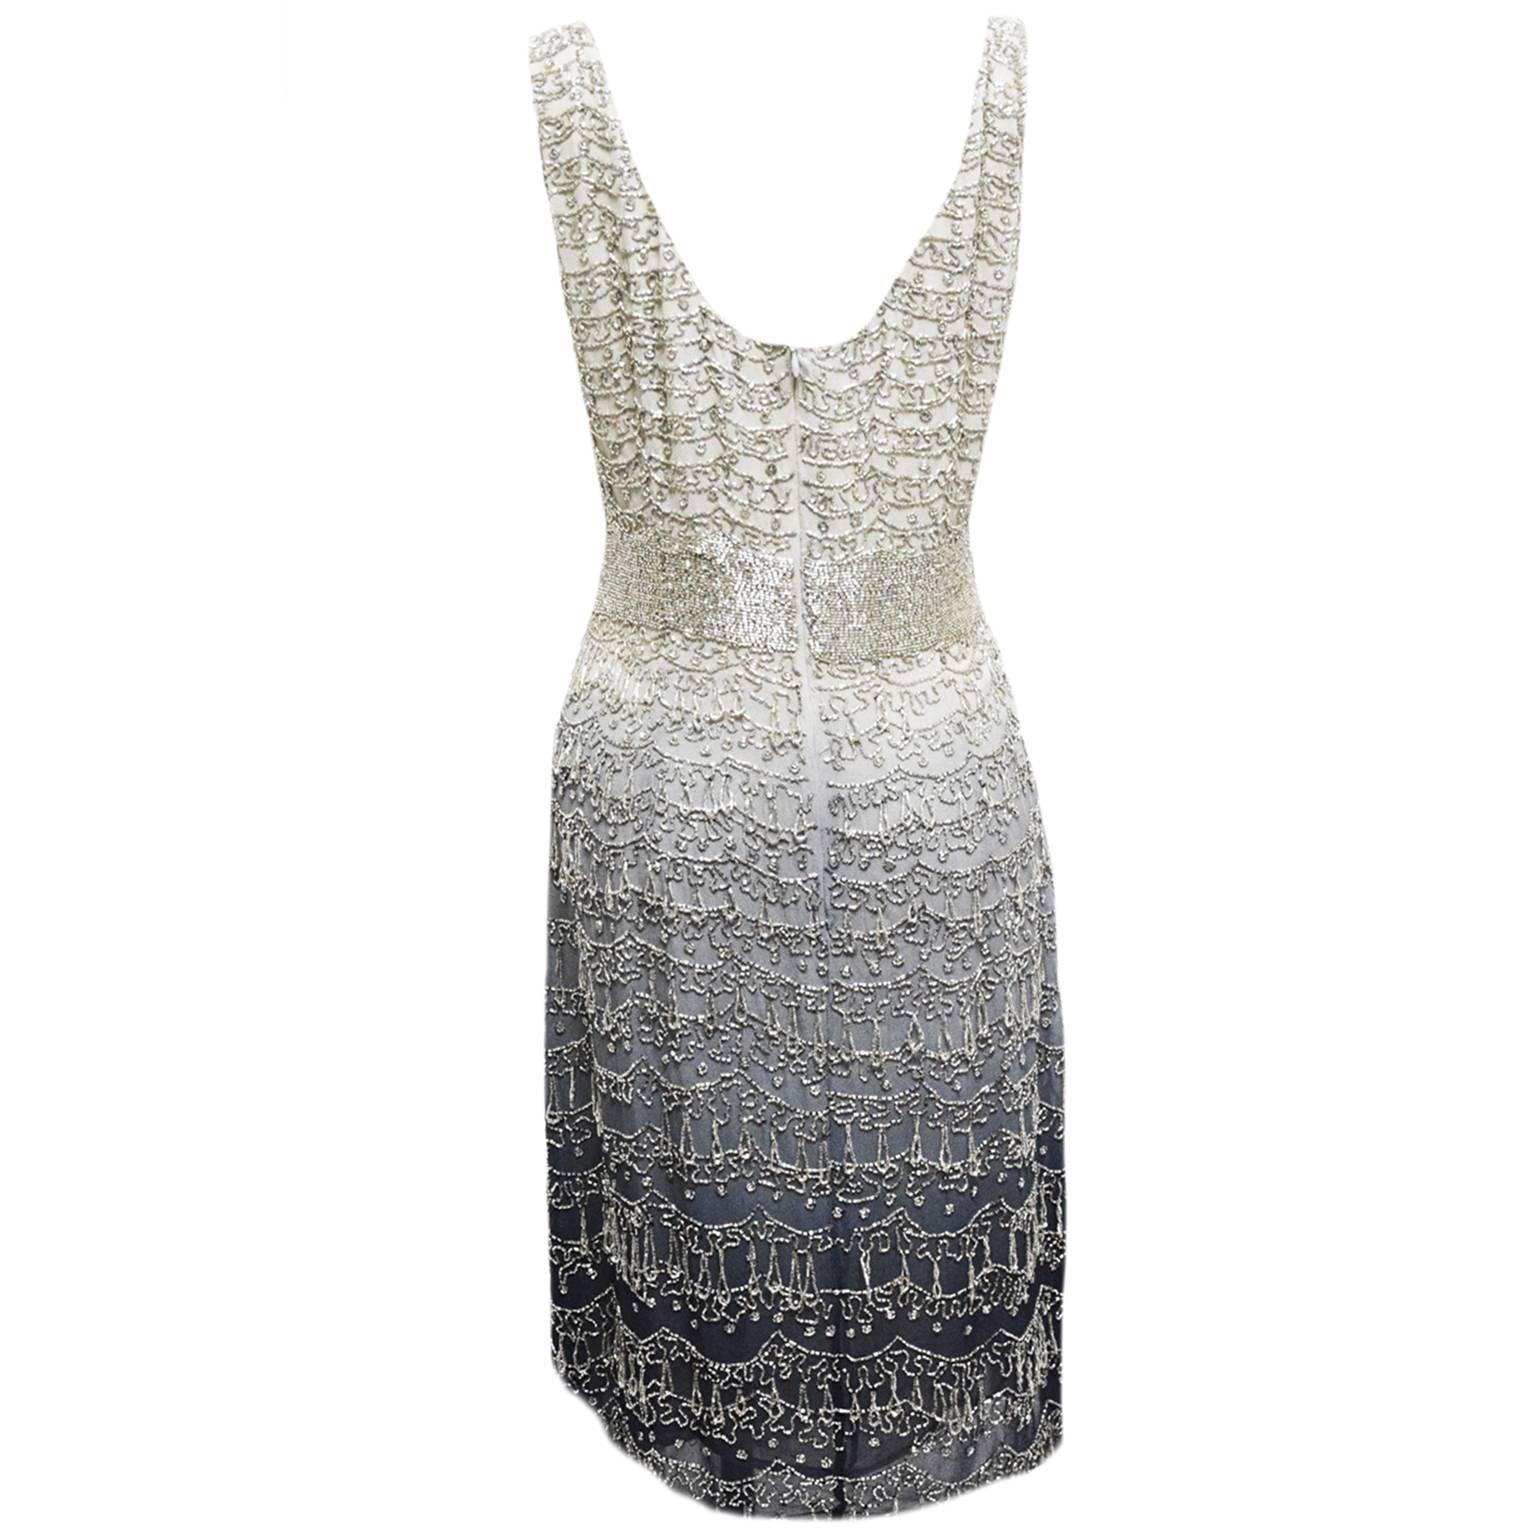 This exquisite Douglas Hannant Cocktail Dress is one of a kind. 100% ombre silk chiffon with hand sewn glass bead work for a fabulous intricate design pattern. Zipped Back. Glass bead drop bottom border. Above the knee.